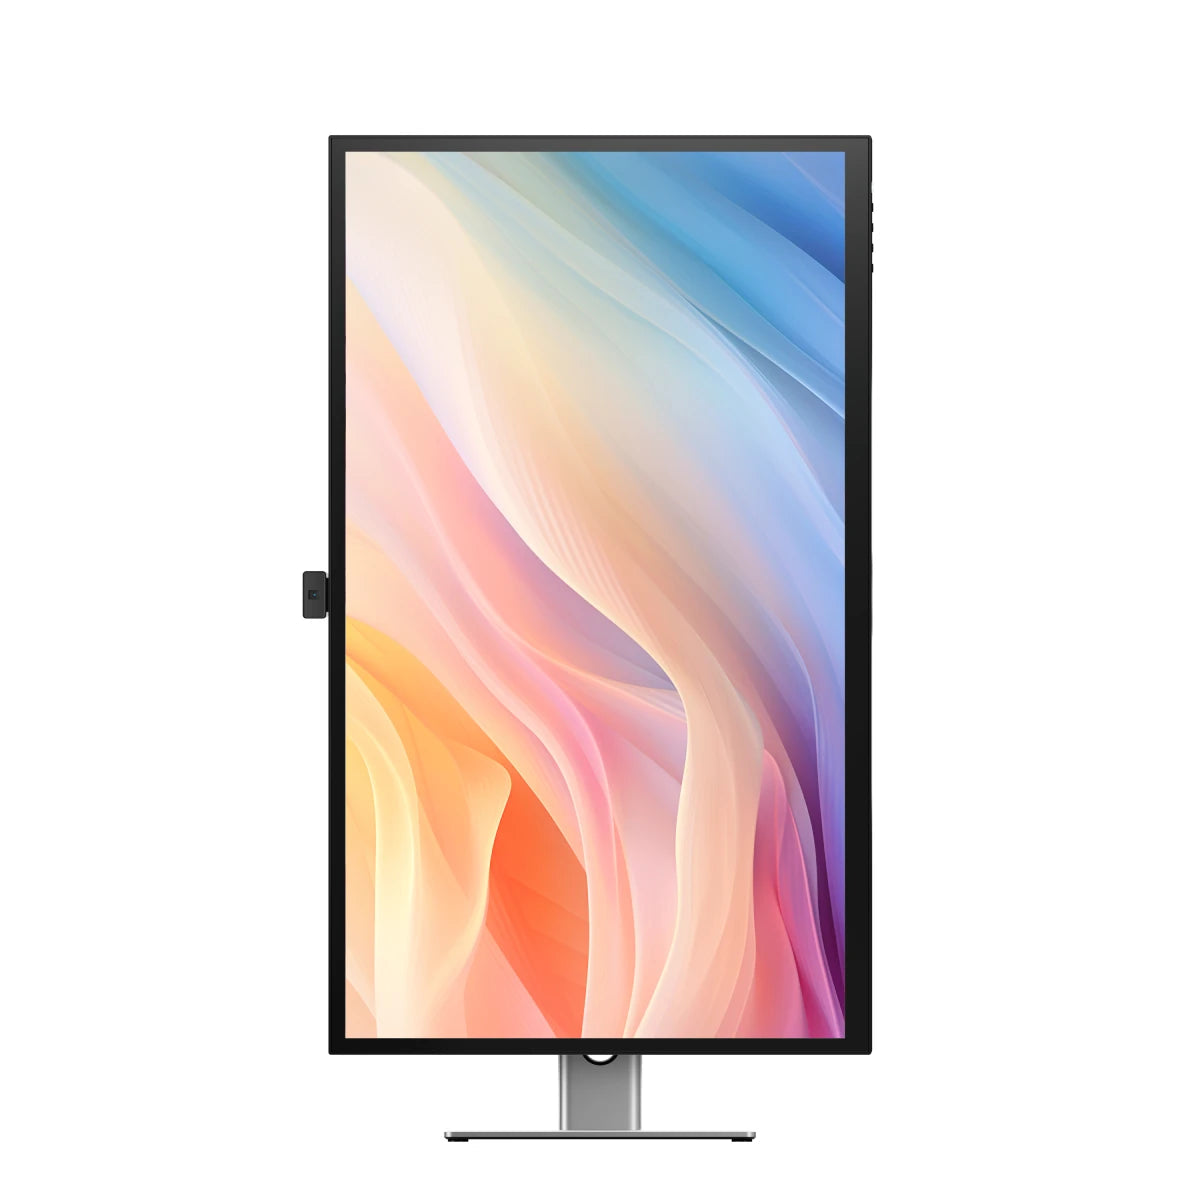 Clarity Max Pro 32-in UHD 4K LED Computer Monitor w USB-C Power and Webcam